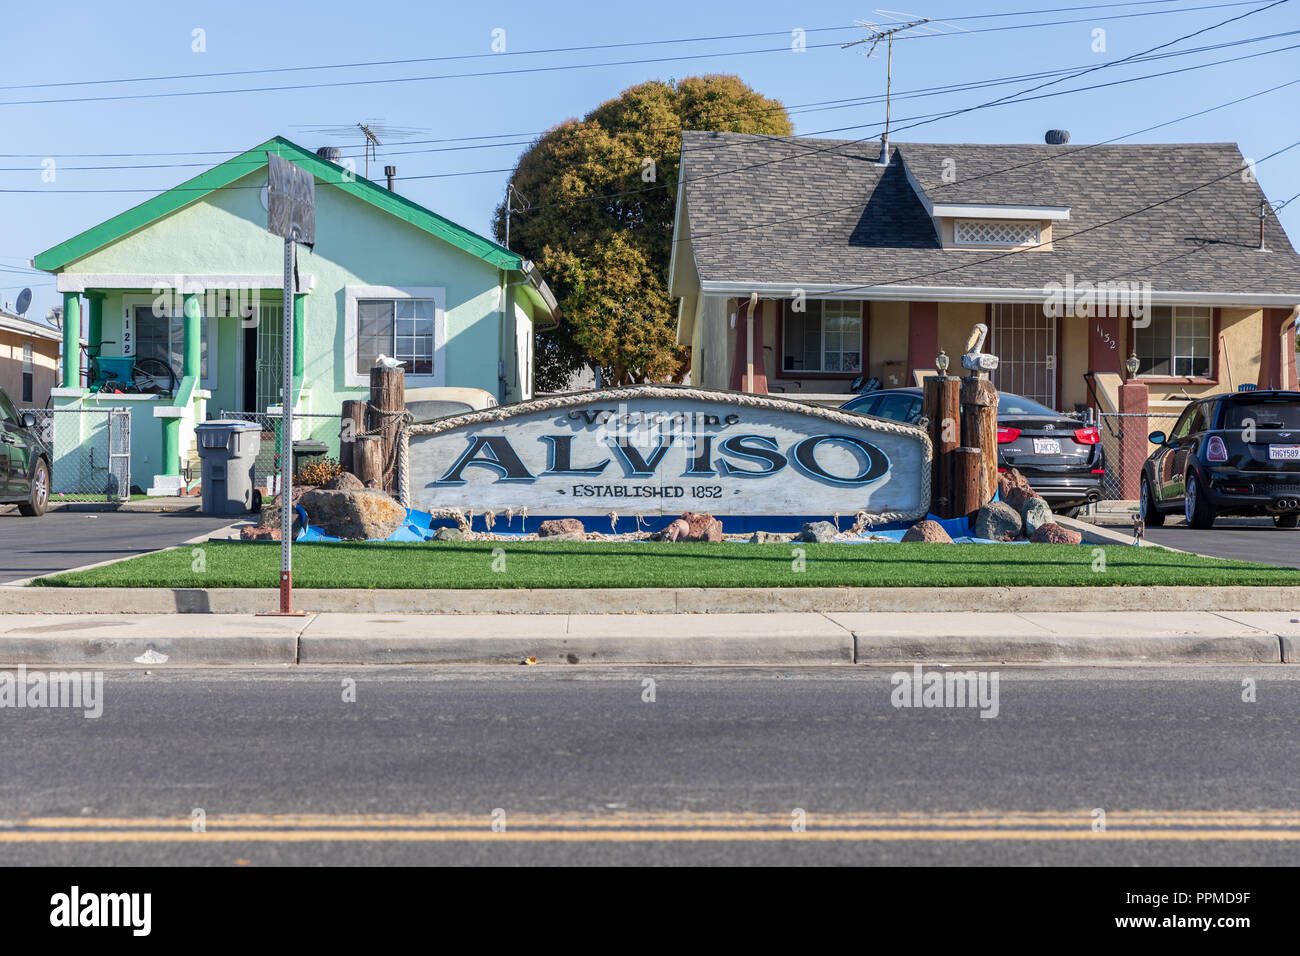 Welcome – Alviso – Established 1852, sign in front of residential houses; Alviso, San José, California, USA Stock Photo